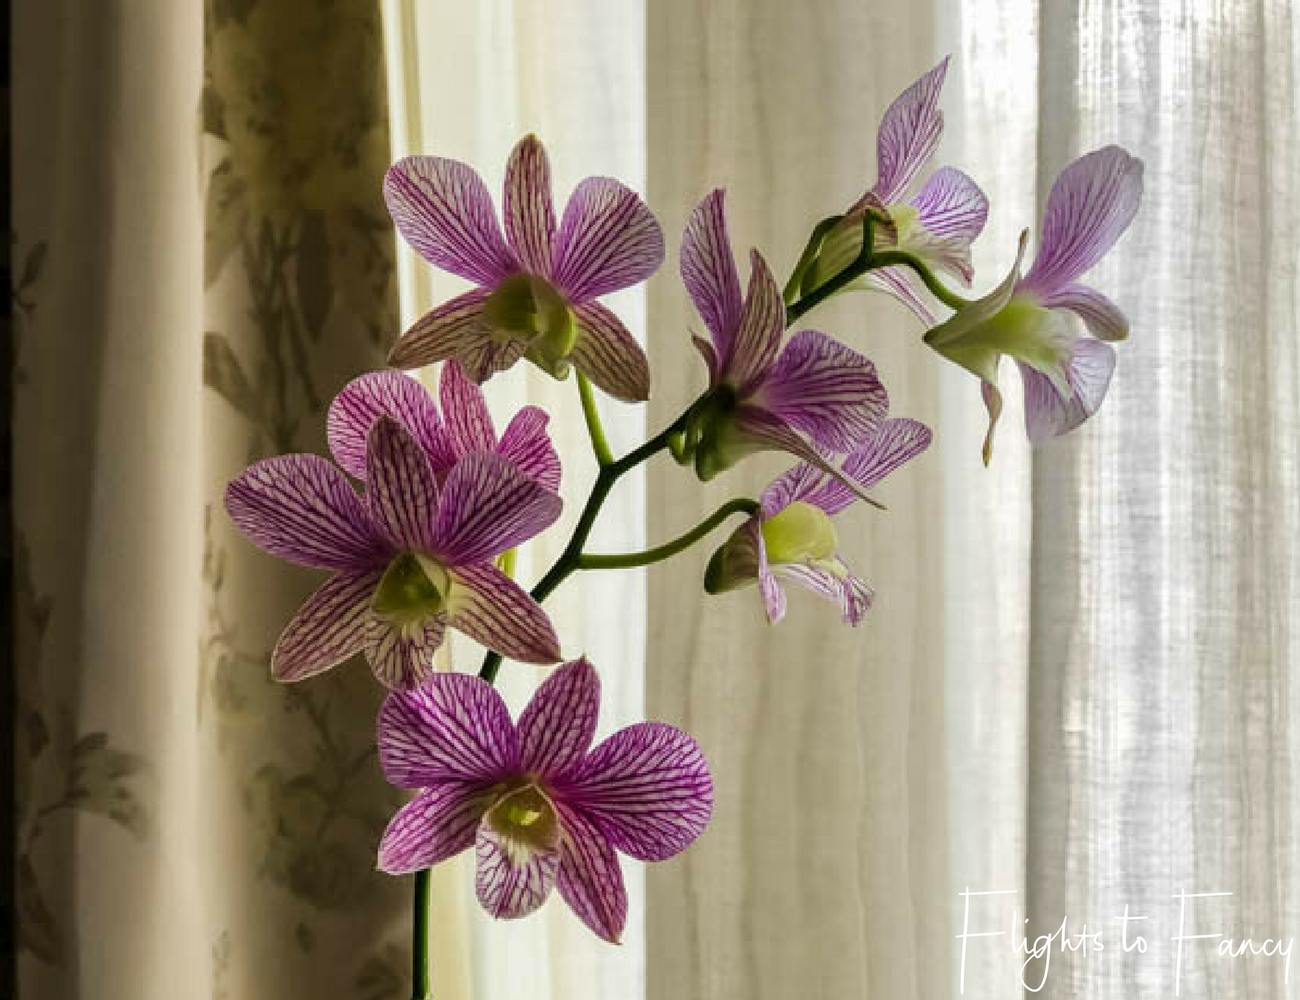 Flights To Fancy at Raffles Makati Manila - When you get fresh orchids you know you are in one of the top hotels in Makati